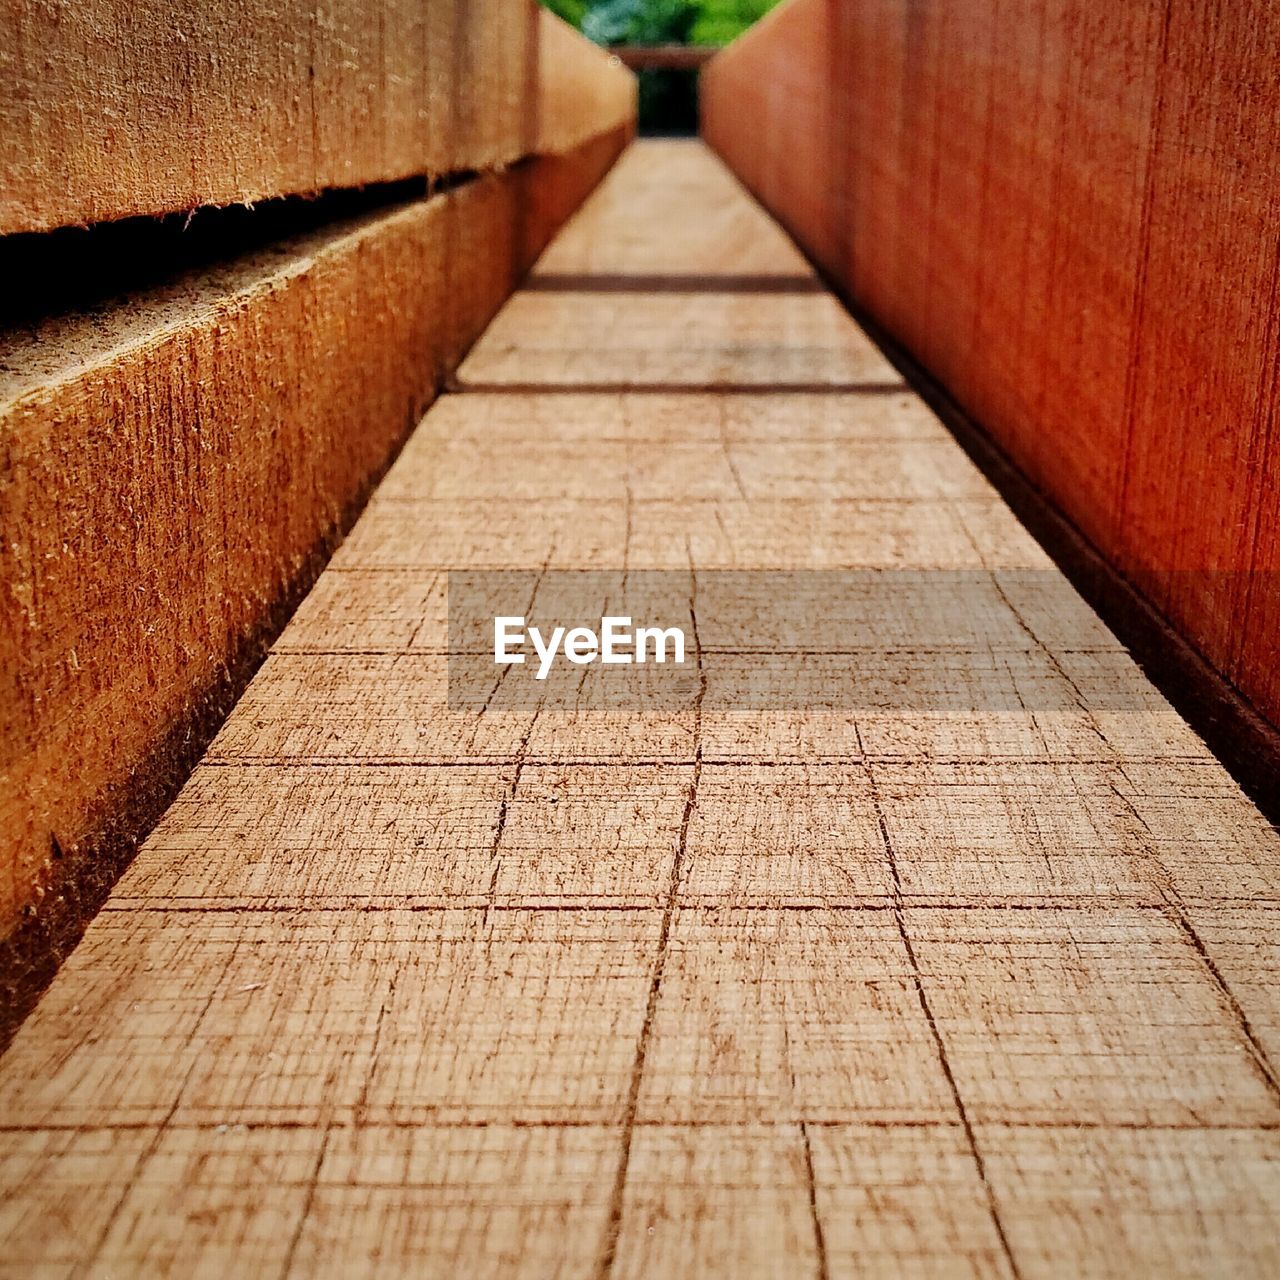 Close-up of wooden bench